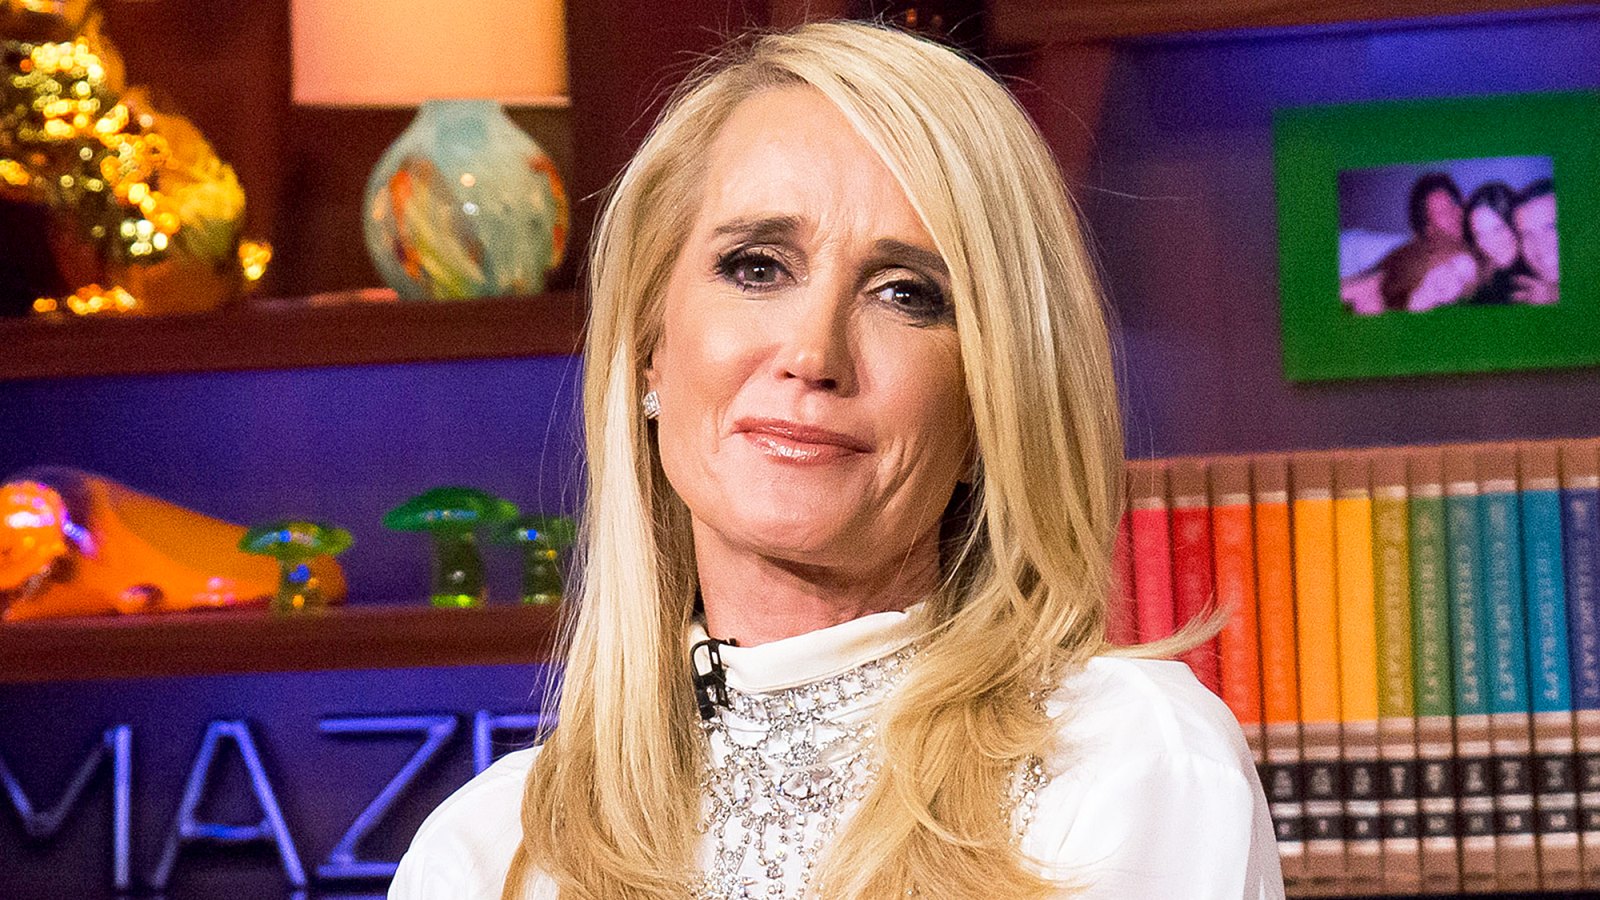 Kim Richards on ‘Watch What Happens Live with Andy Cohen‘